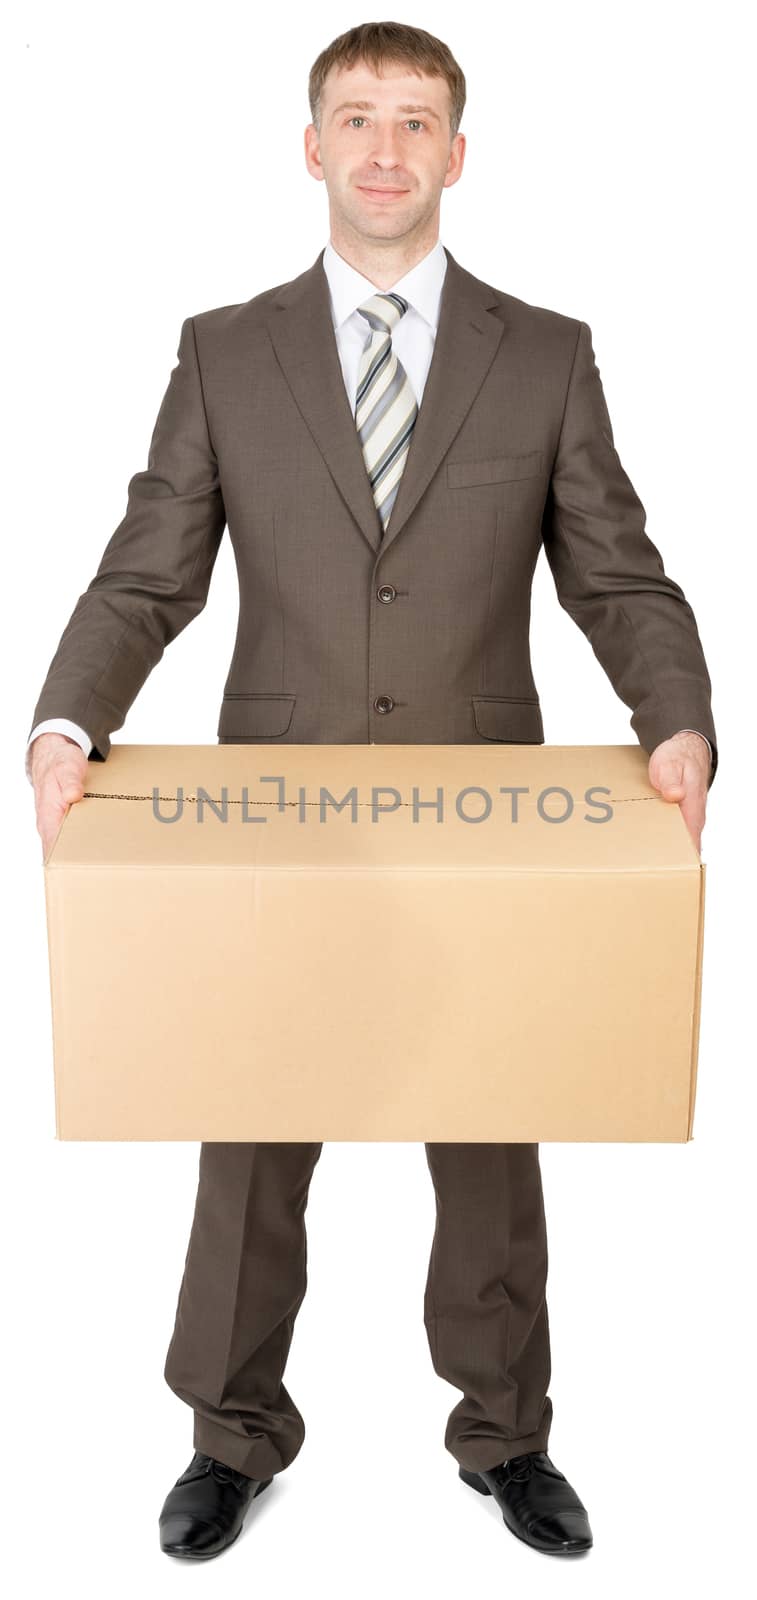 Manager in suit holding parcel box by cherezoff